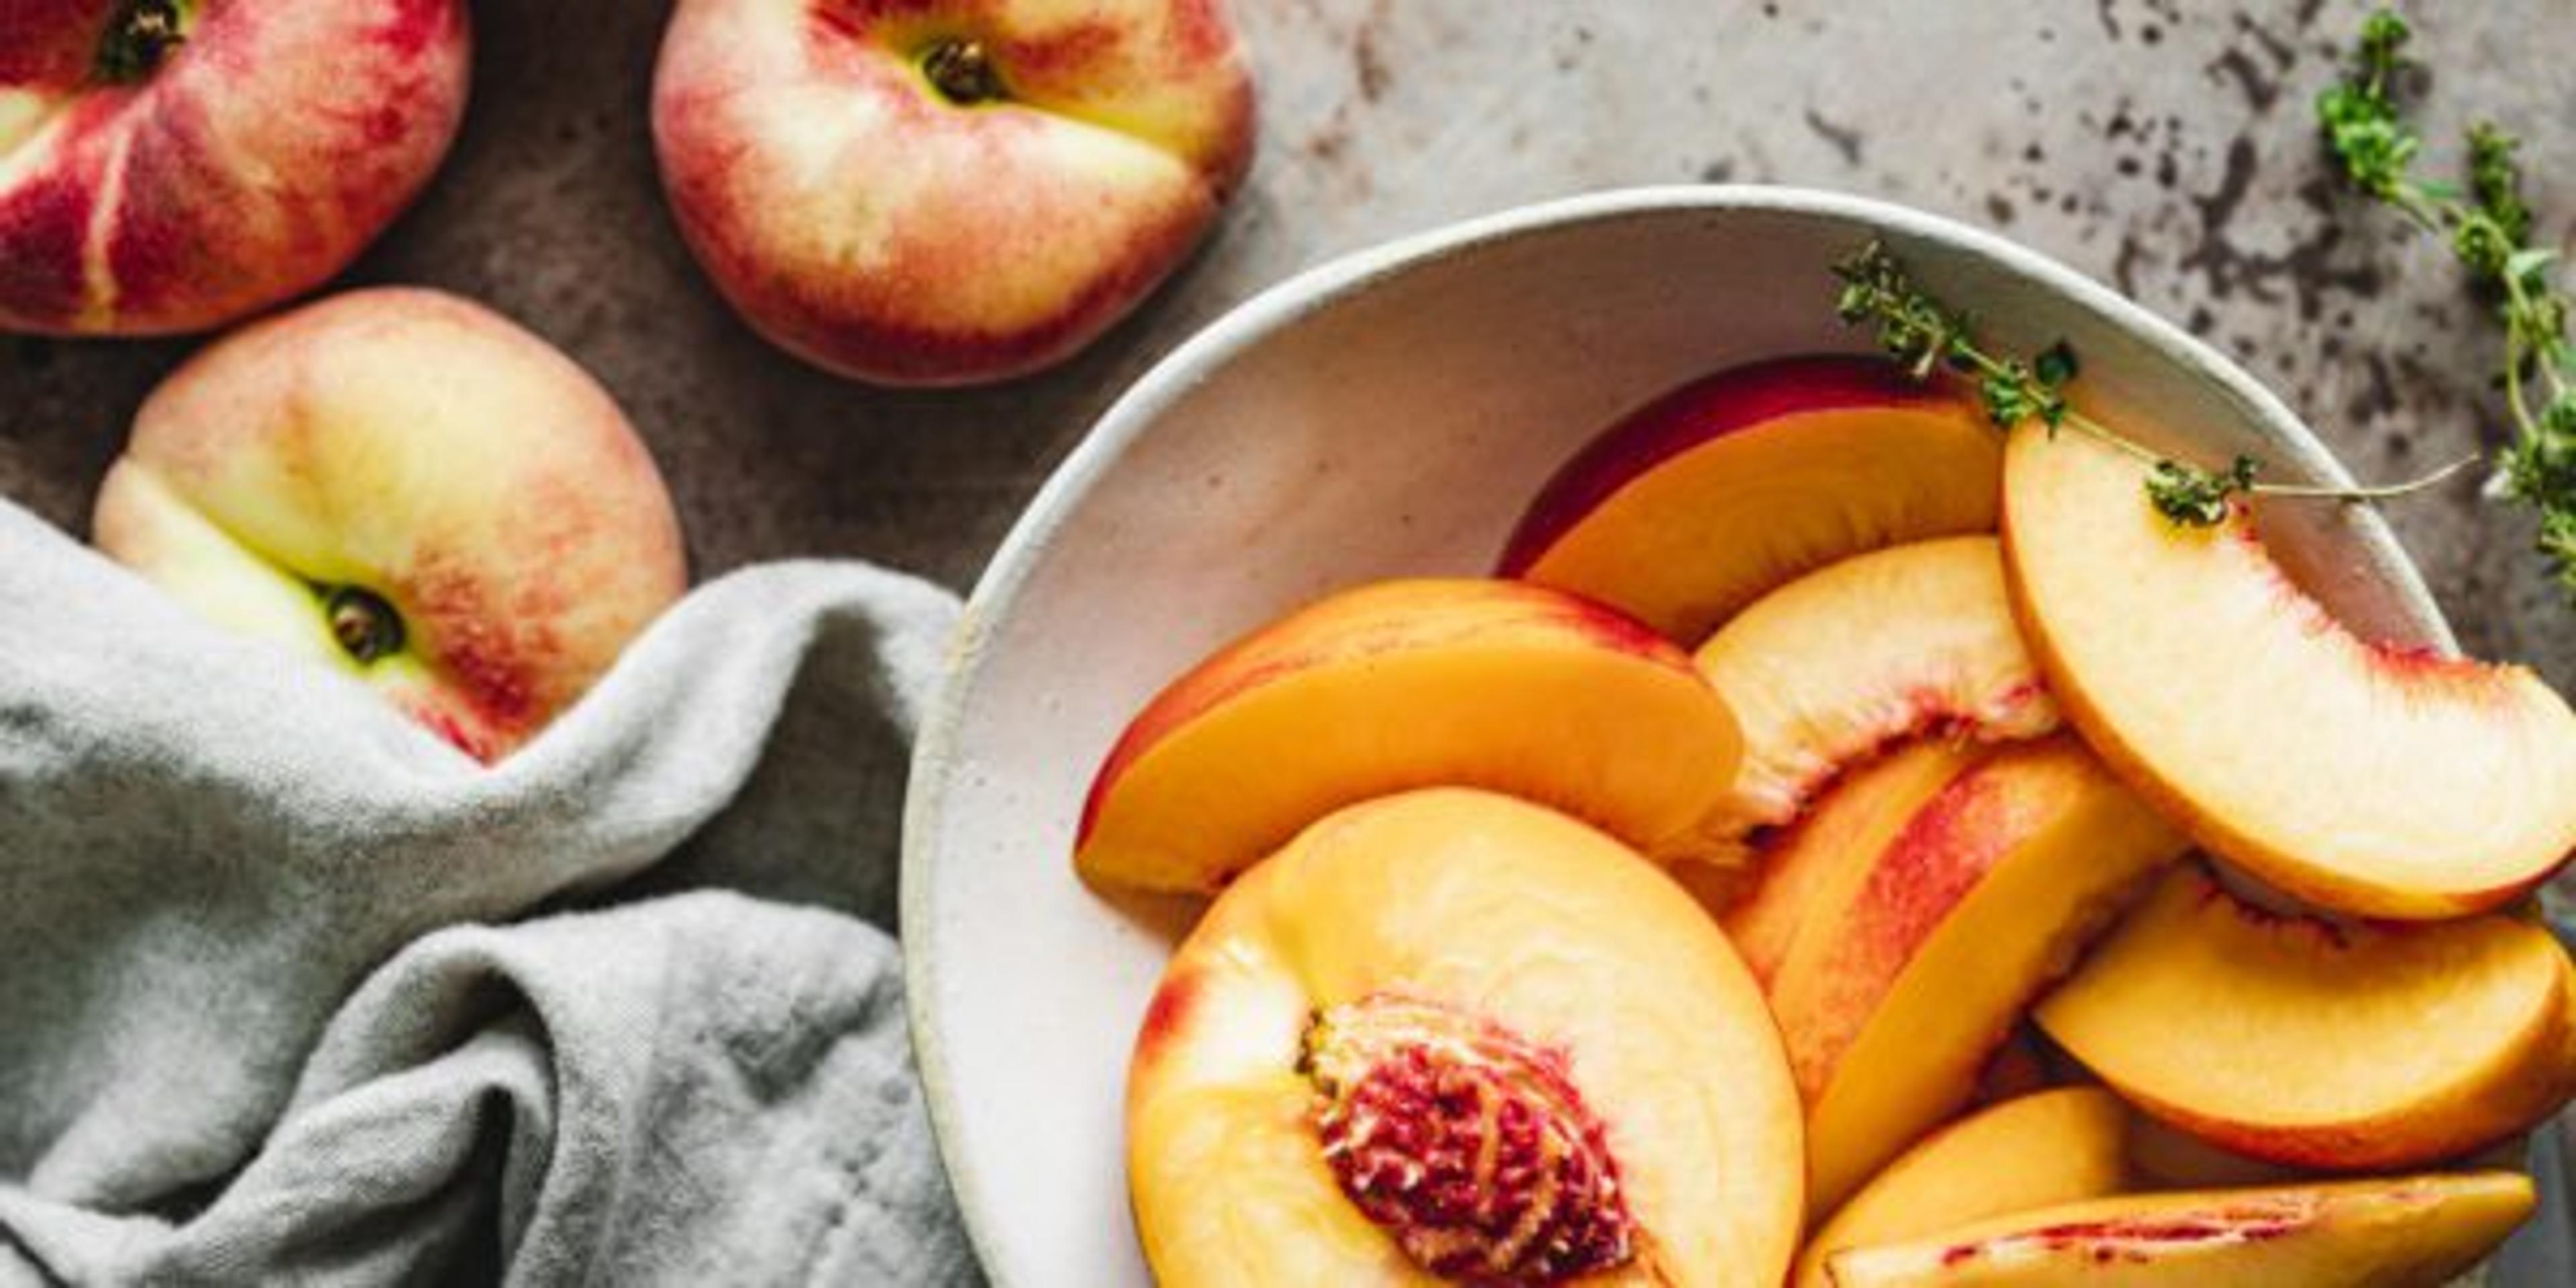 Slices of ripe peaches in a bowl.